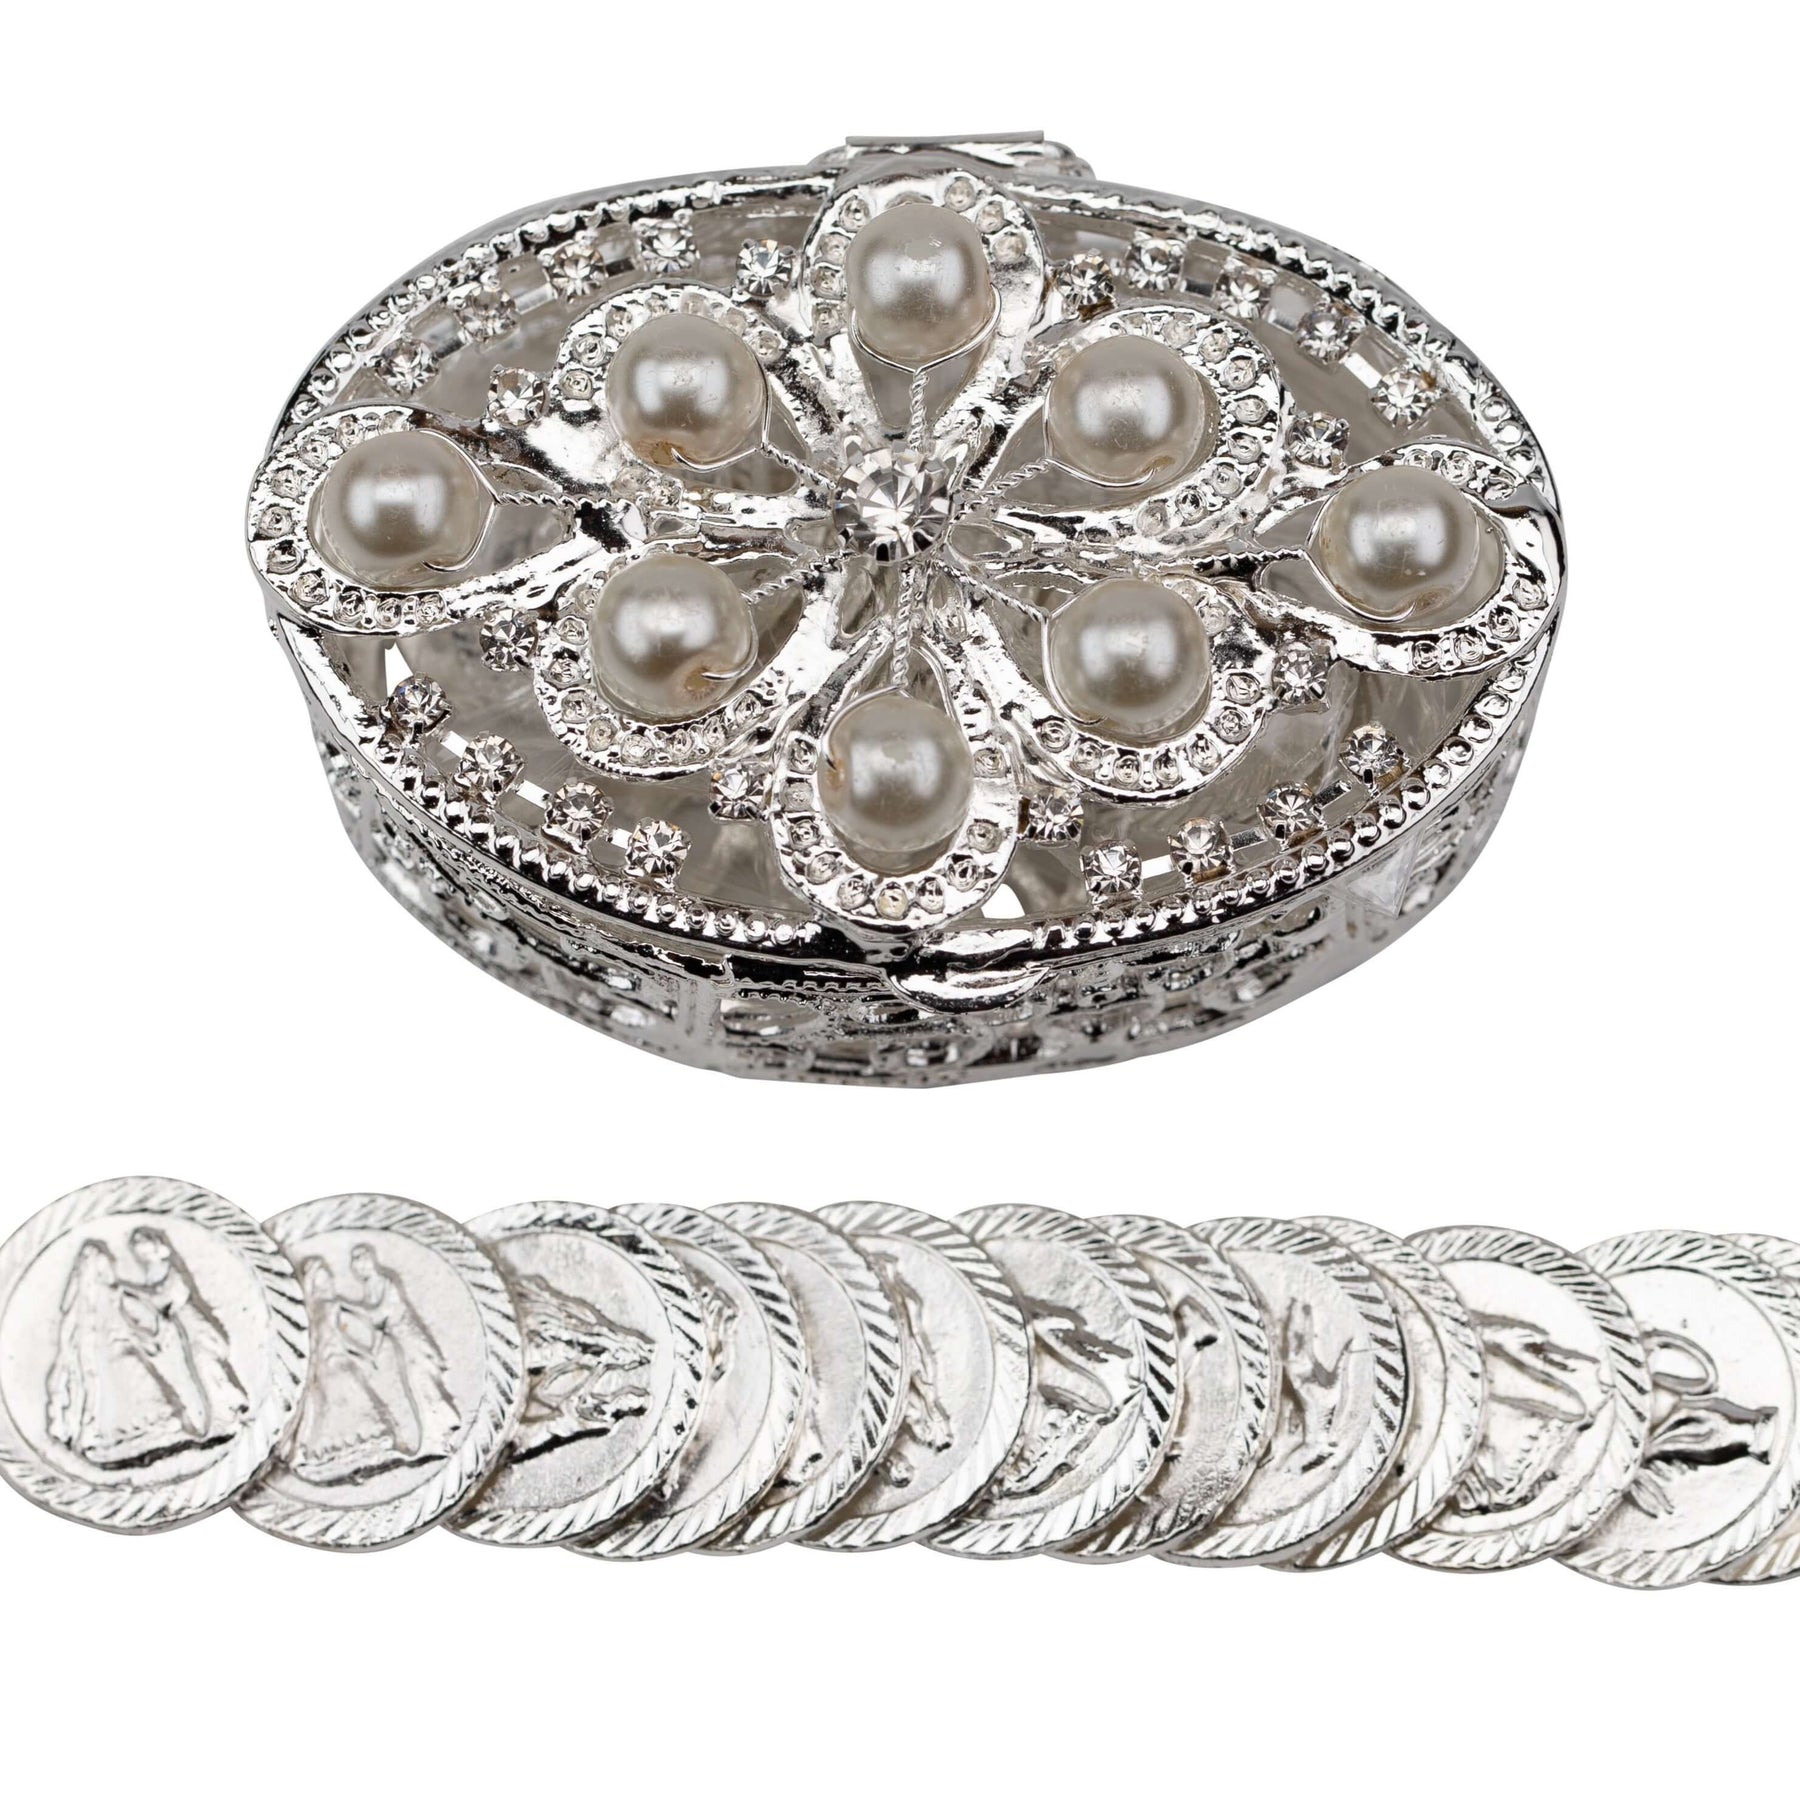 Silver plated oval shaped chest with Swarovski crystal beading. This set includes the traditional 13 coins used in a wedding ceremony.